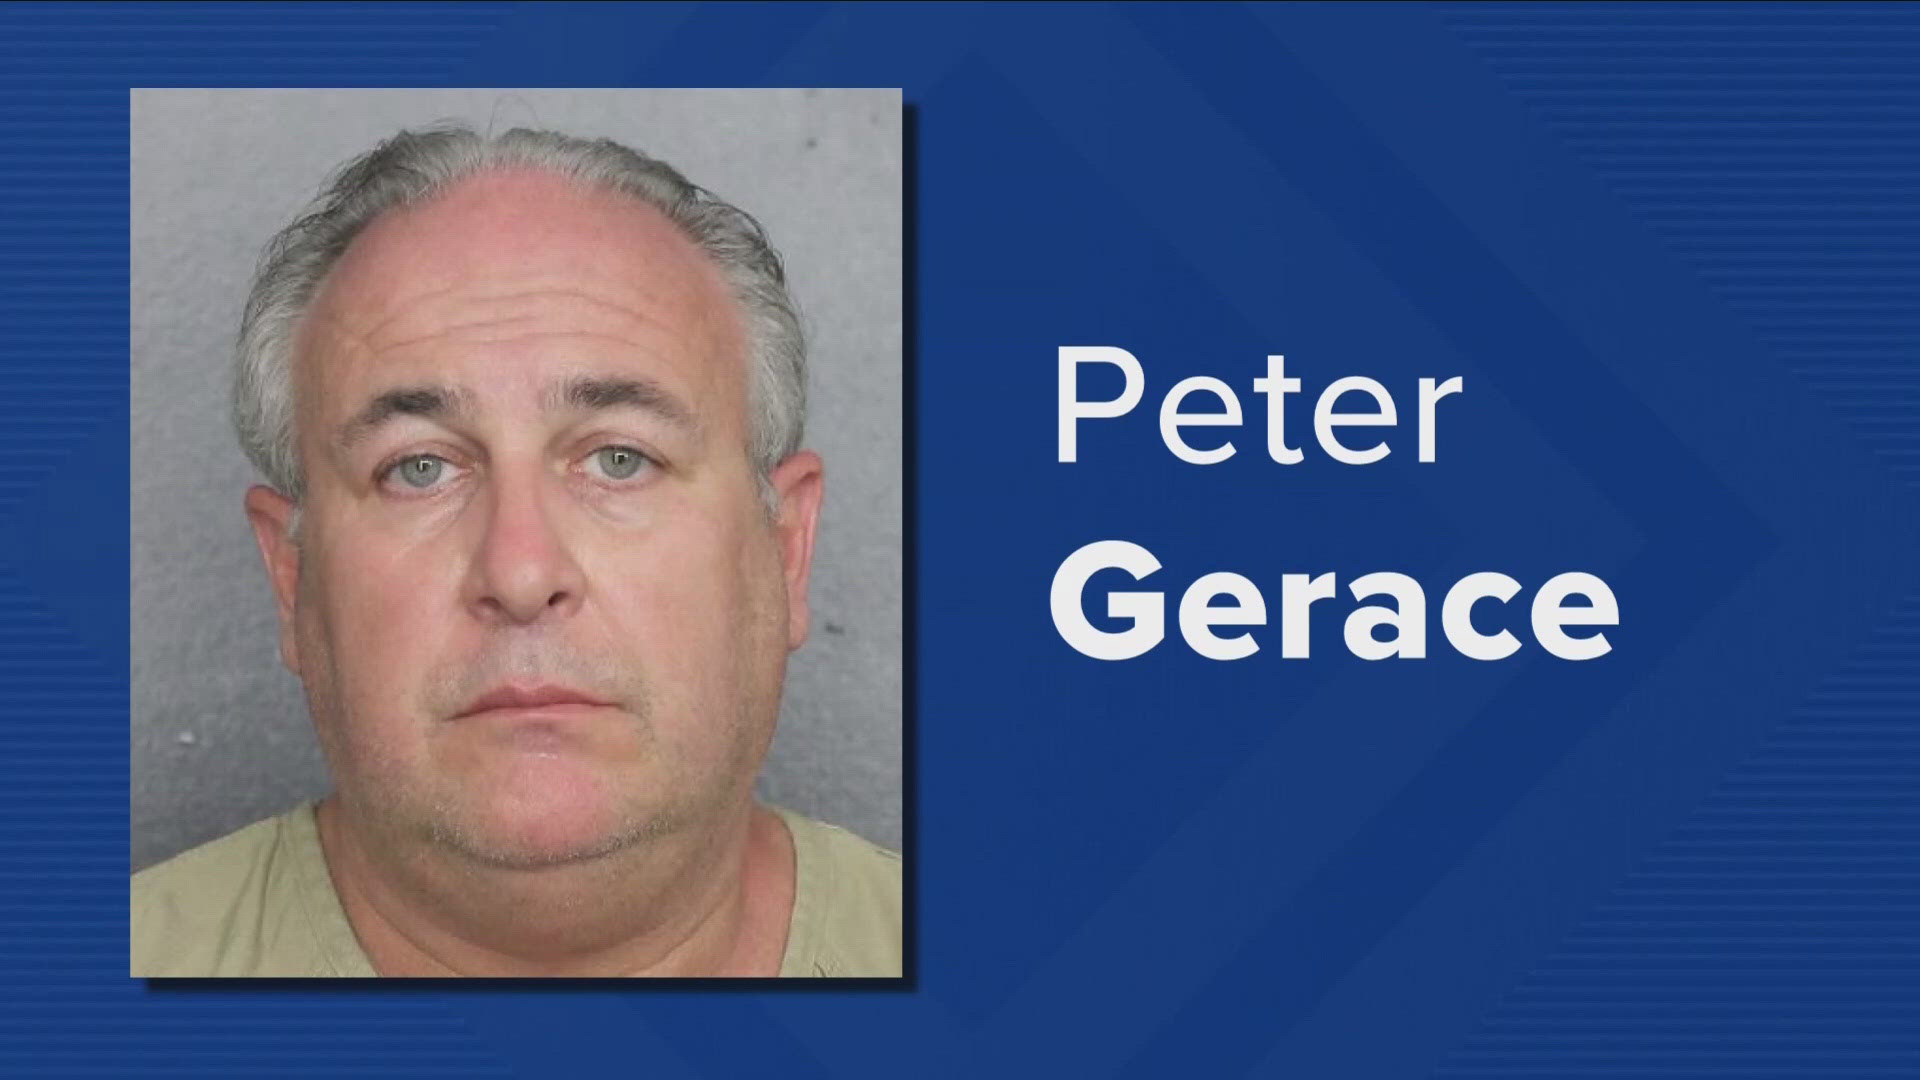 Judge denies motion to remove Gerace lawyer